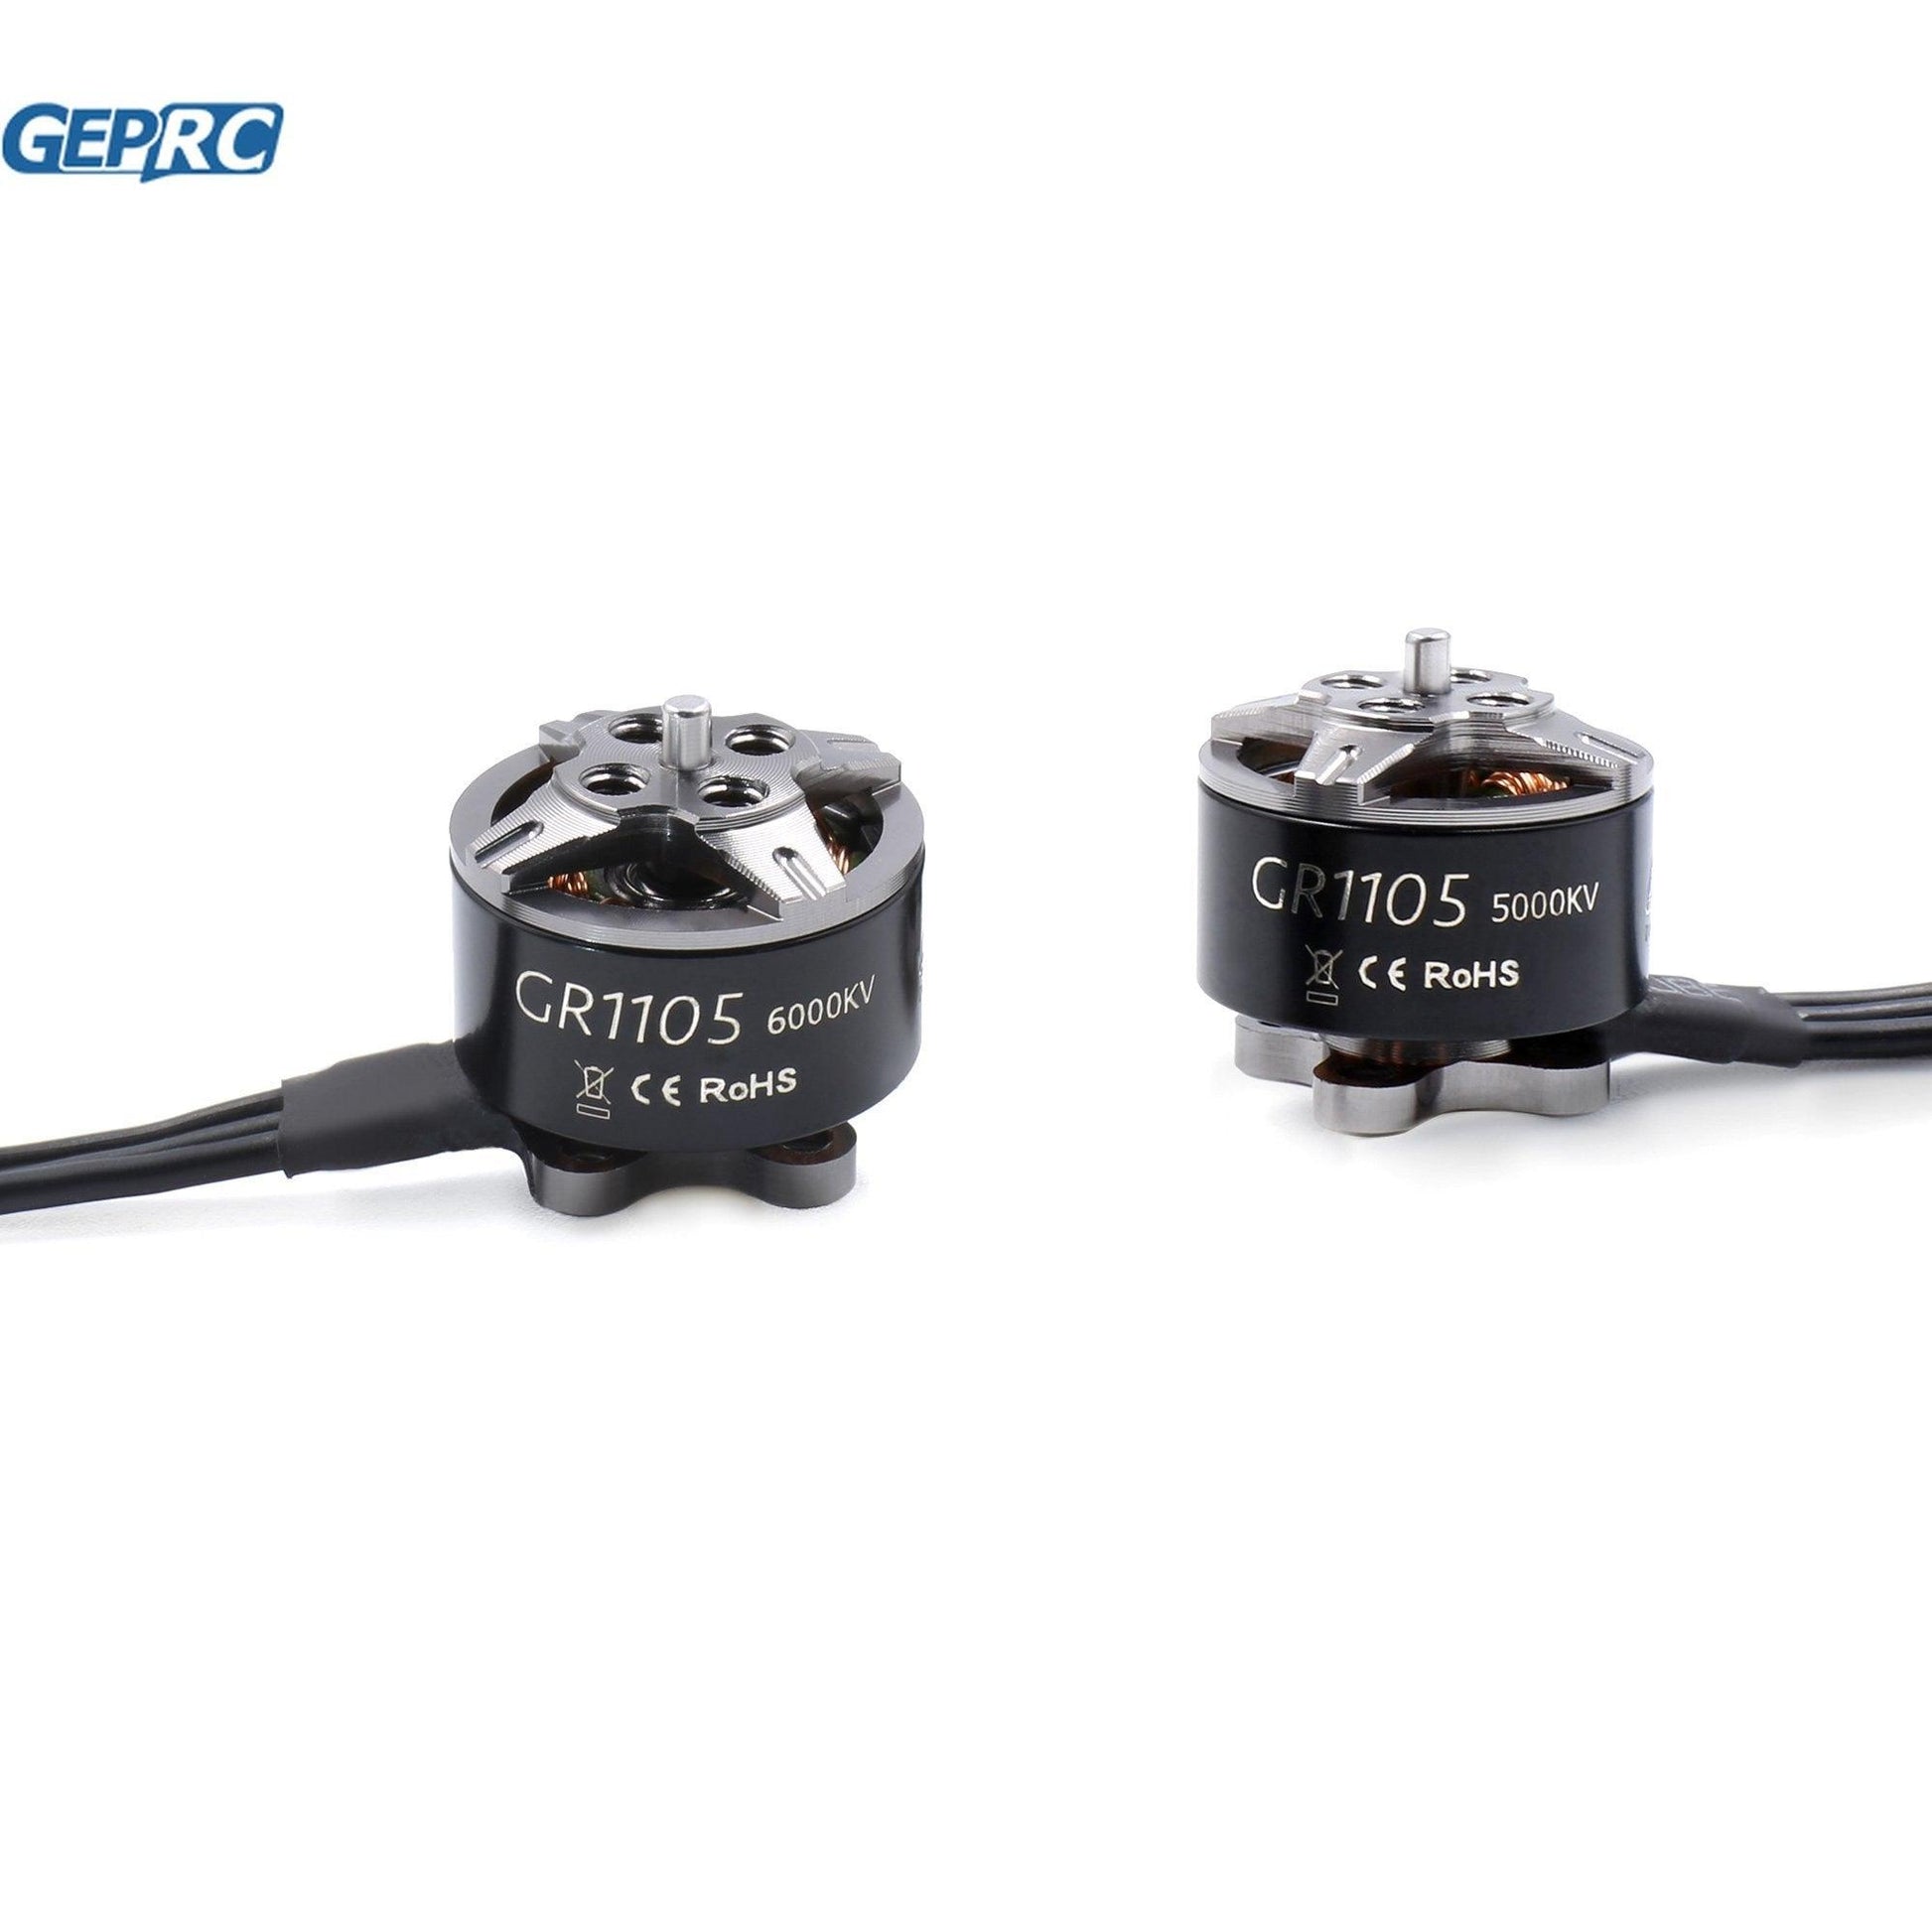 GEPRC GEP GR1105 5000kv 6000kv Motor - Brushless Motor with for FPV RC Racing Drone Multicopter - RCDrone